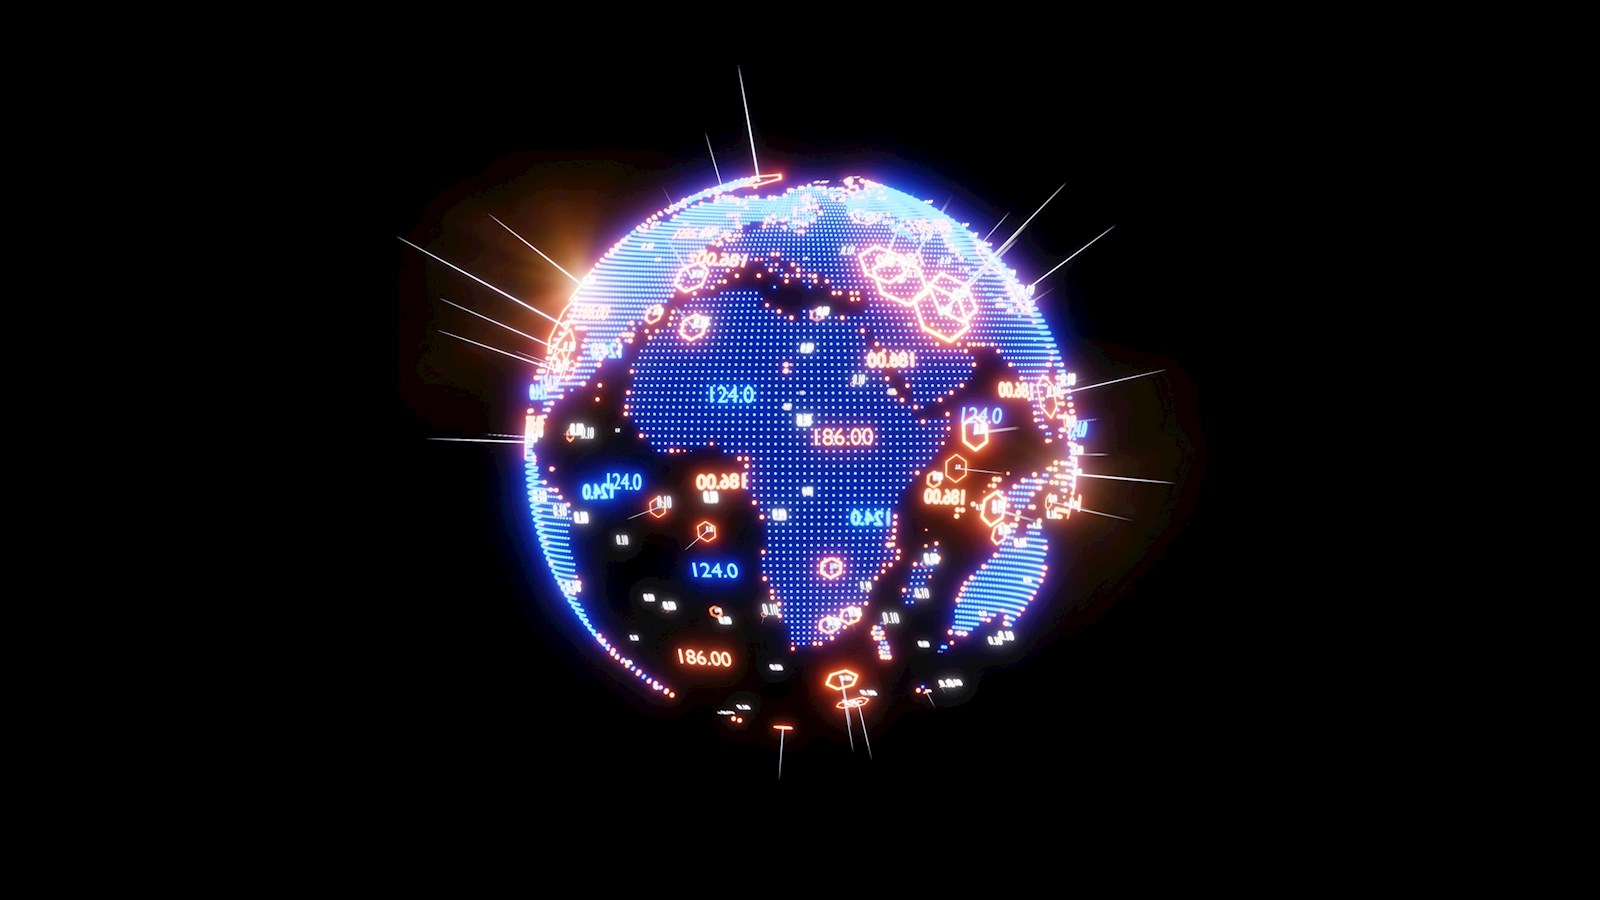 Graphic image of earth with countries and figures marked on in lights